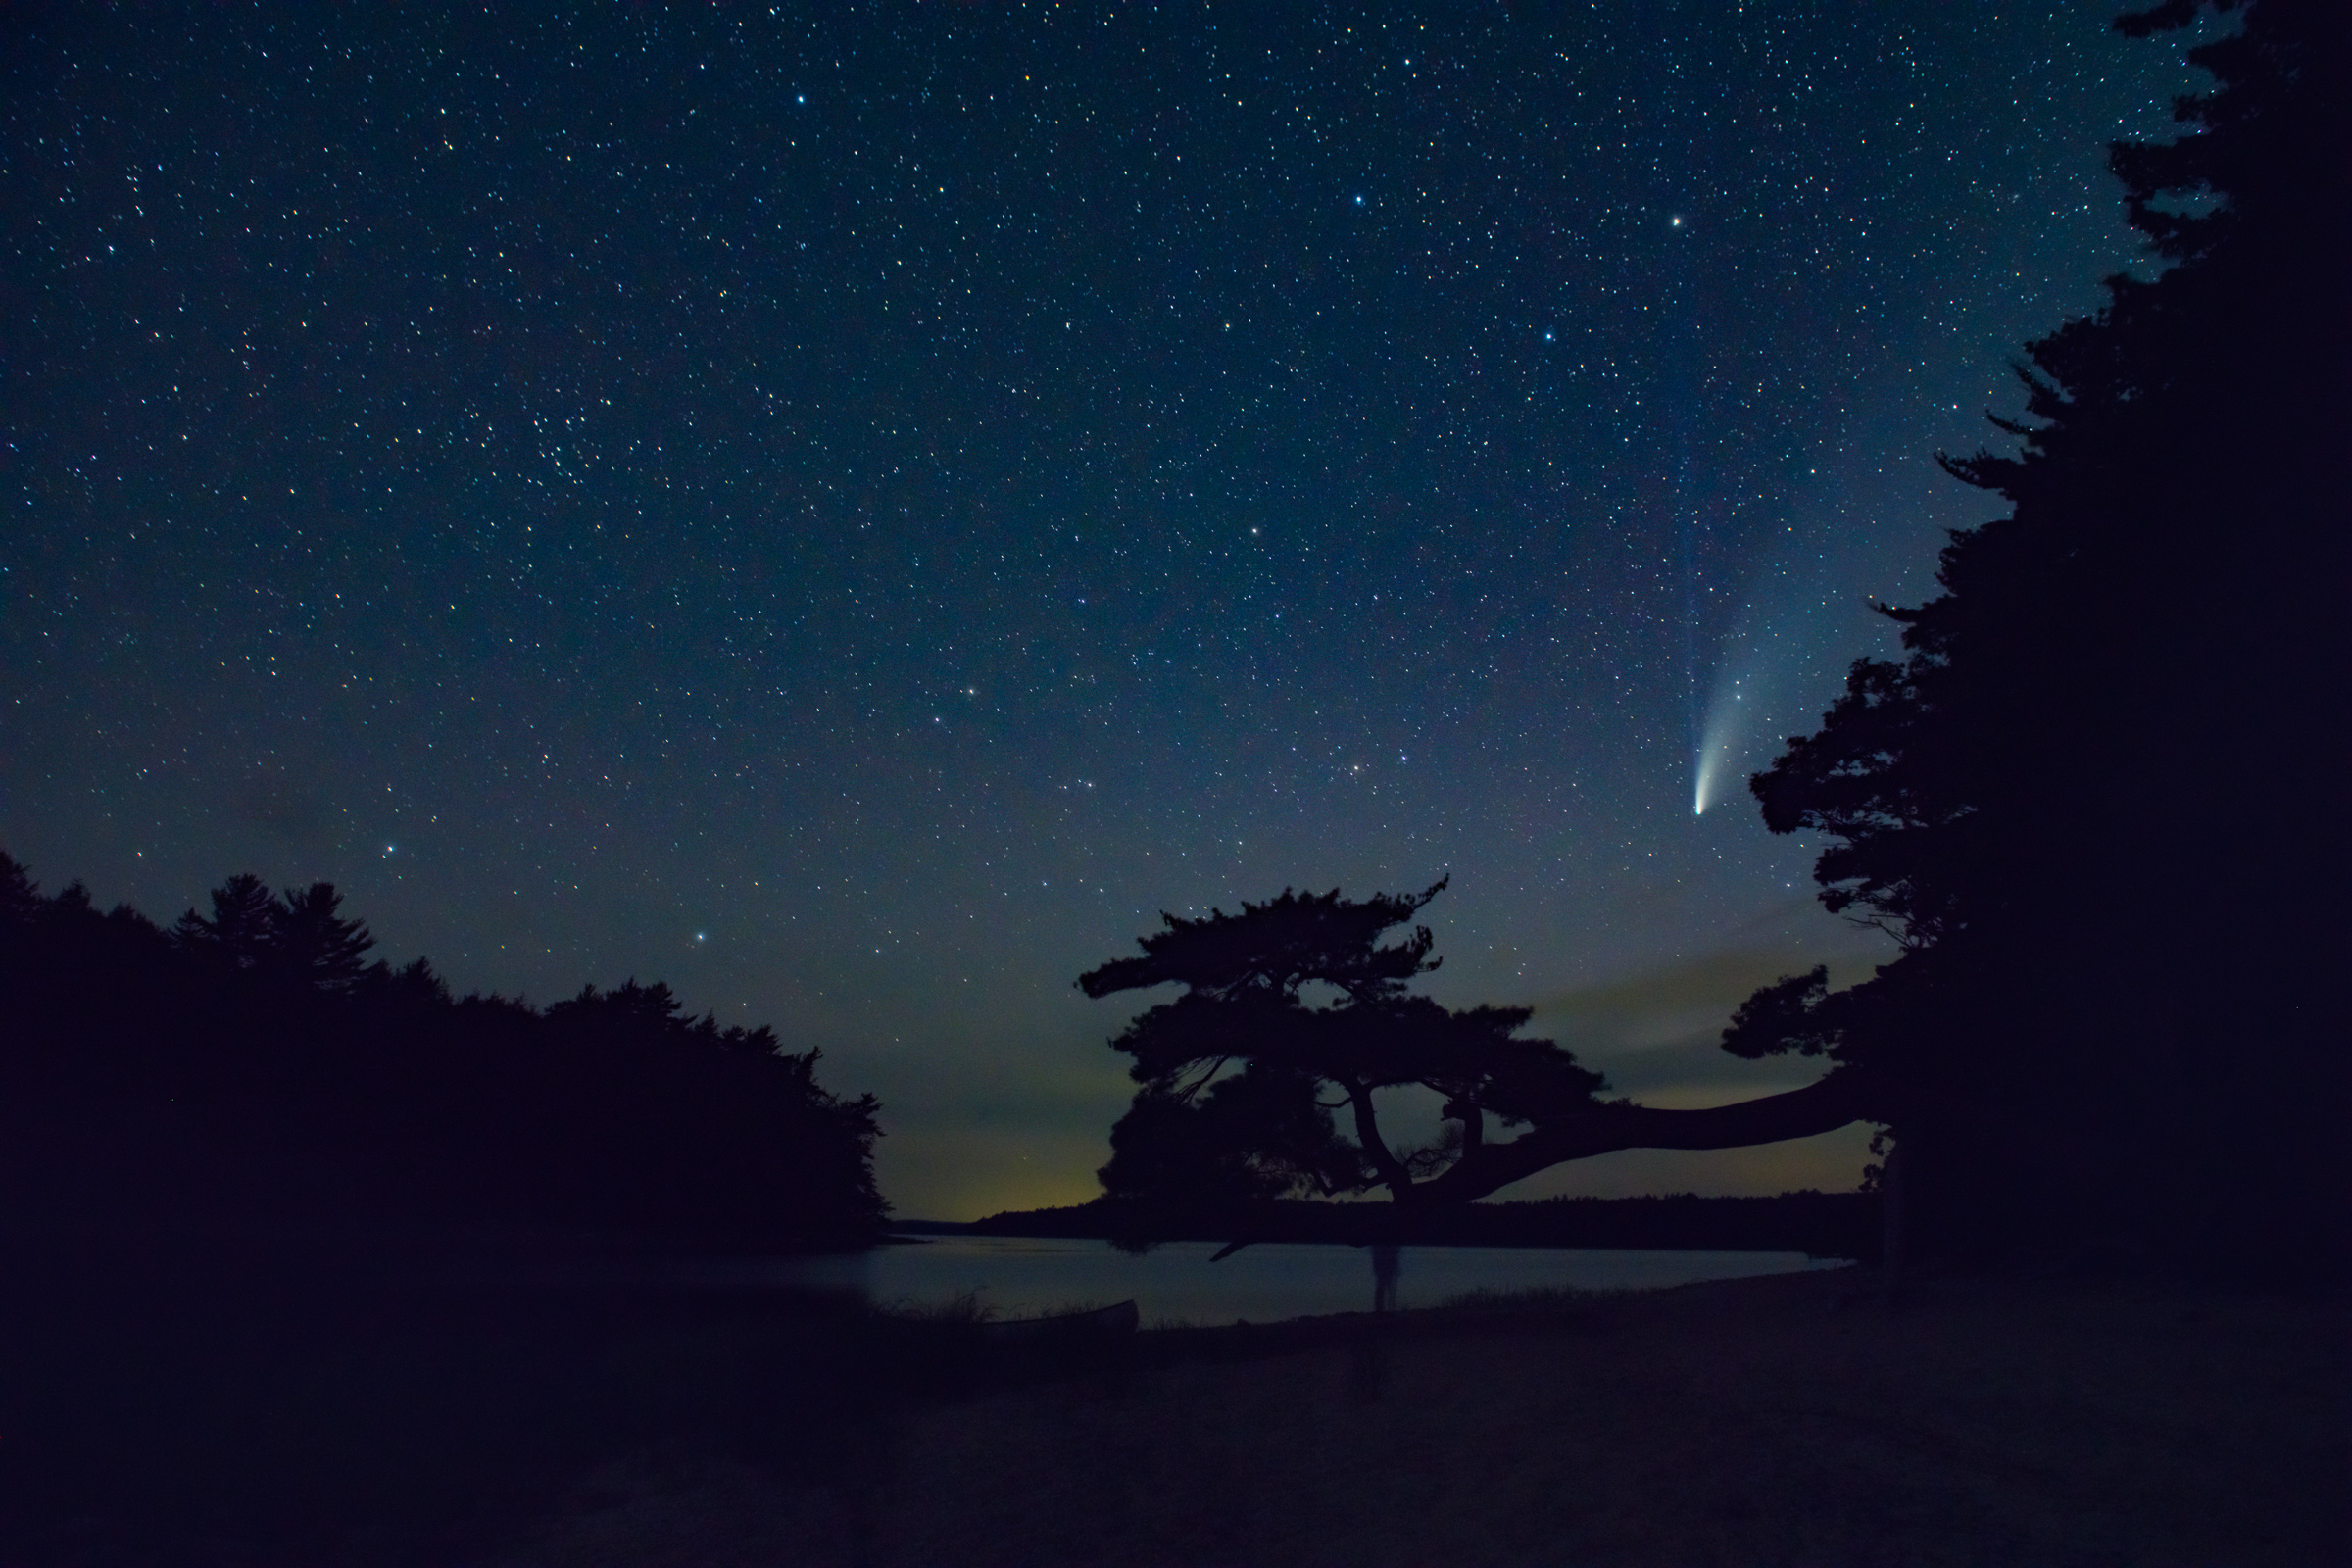 Peoples Choice Winner: 15 - Observing Comet NEOWISE in solitude - Jerry Black